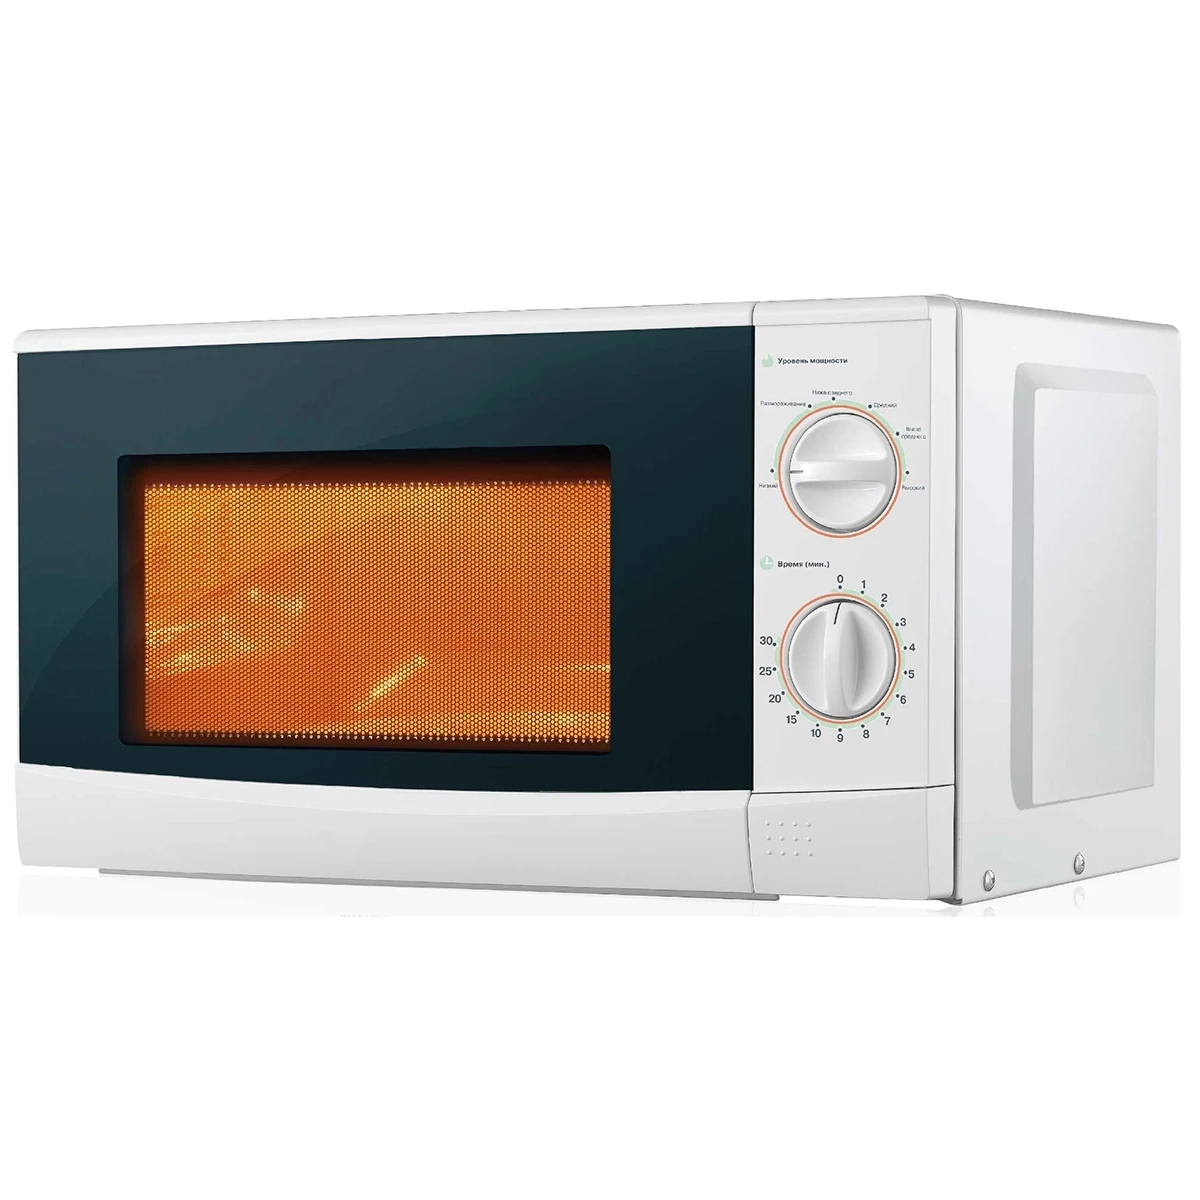 20l 700w Portable Countertop Stainless Steel Panel Microwave Oven - Buy